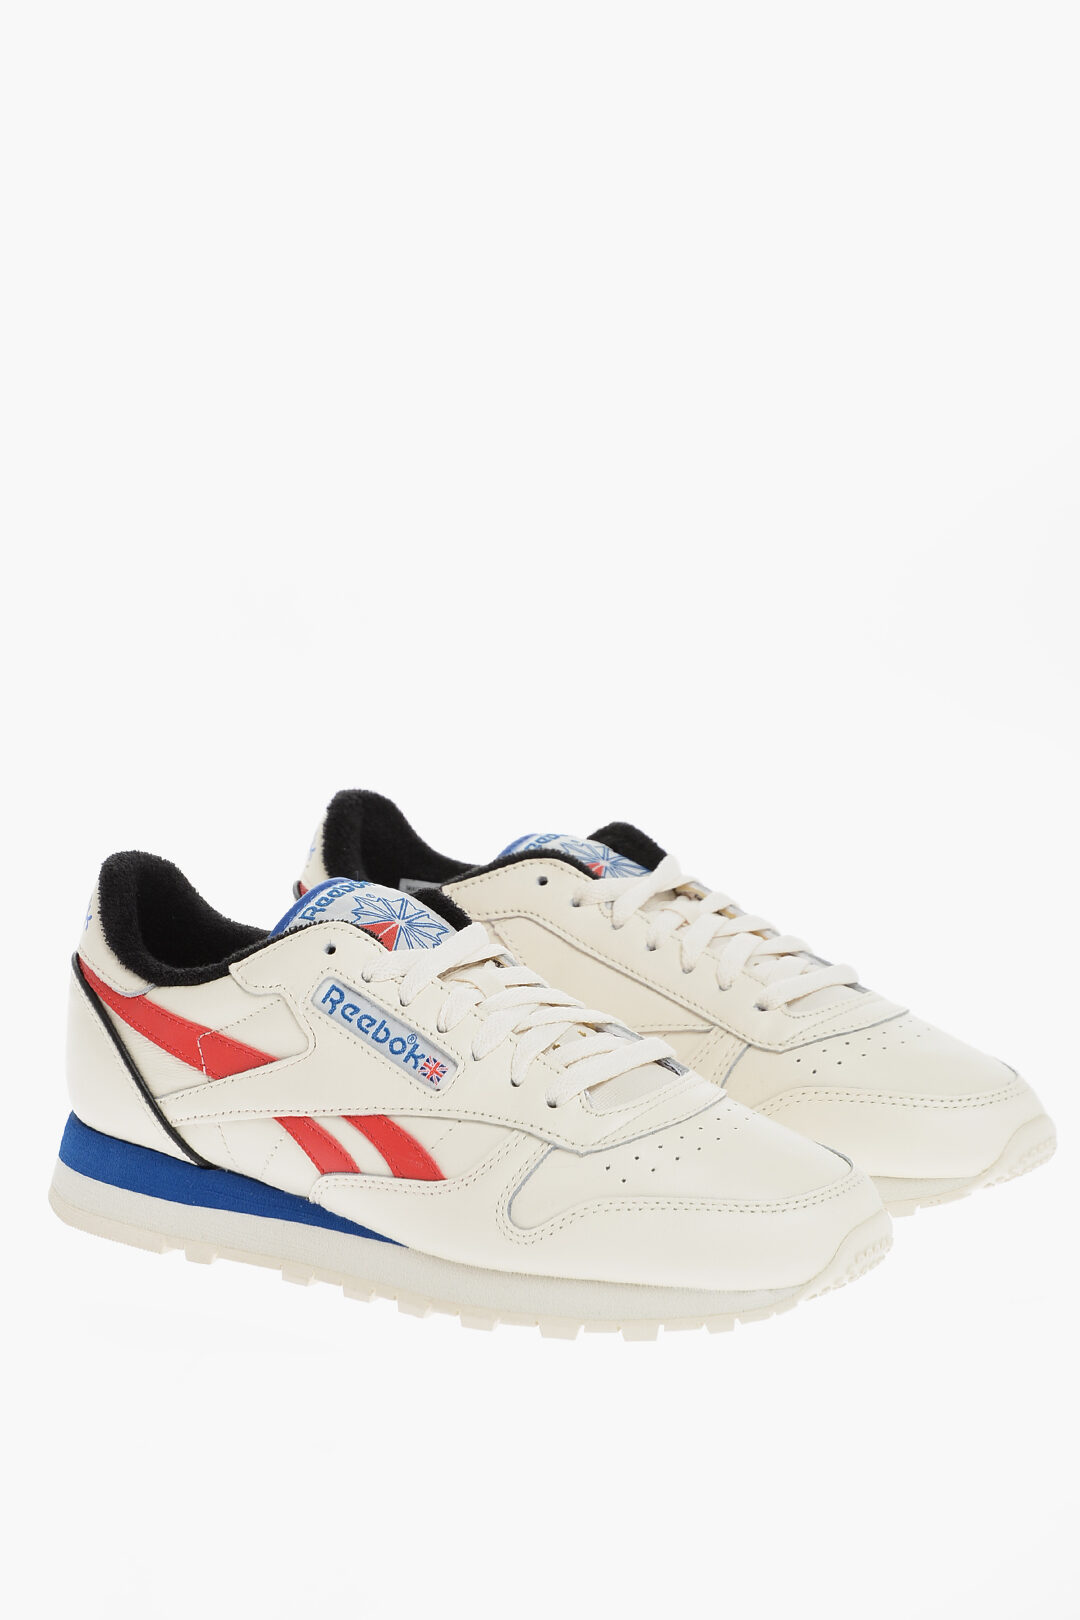 Reebok Classic Leather (9771) – STNDRD ATHLETIC CO.